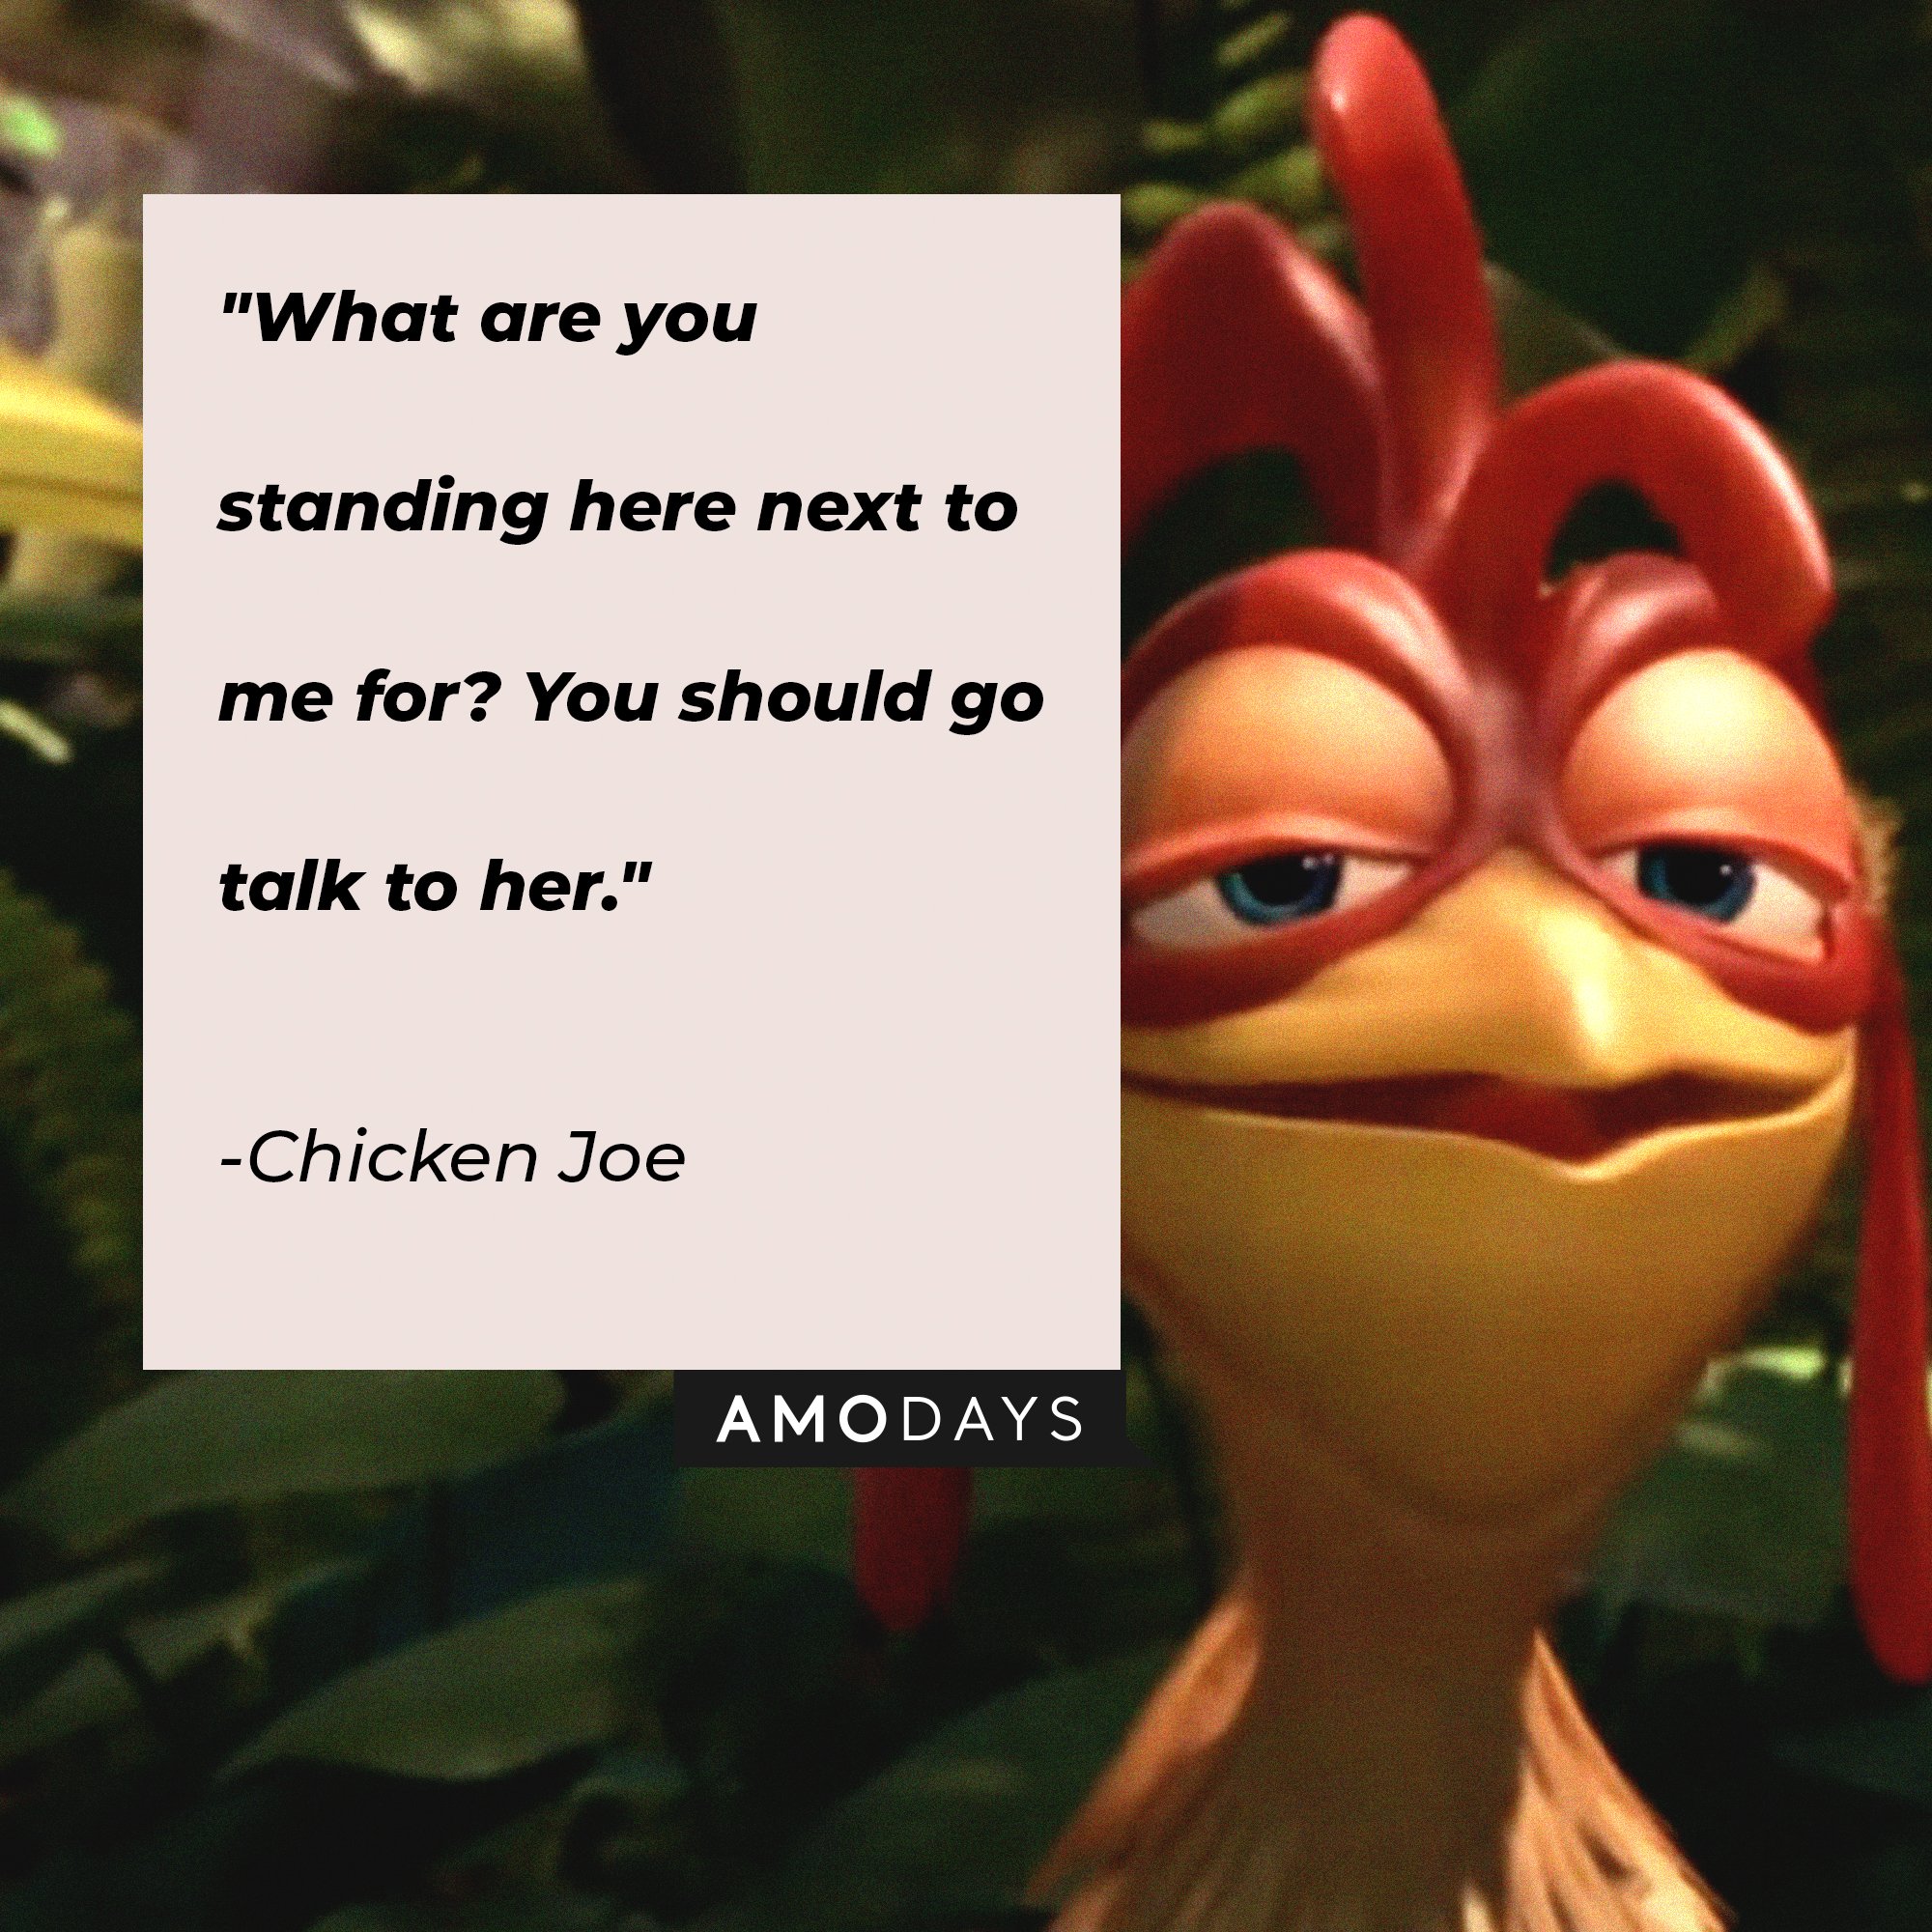 Chicken Joe's quote: "What are you standing here next to me for? You should go talk to her." | Image: AmoDays